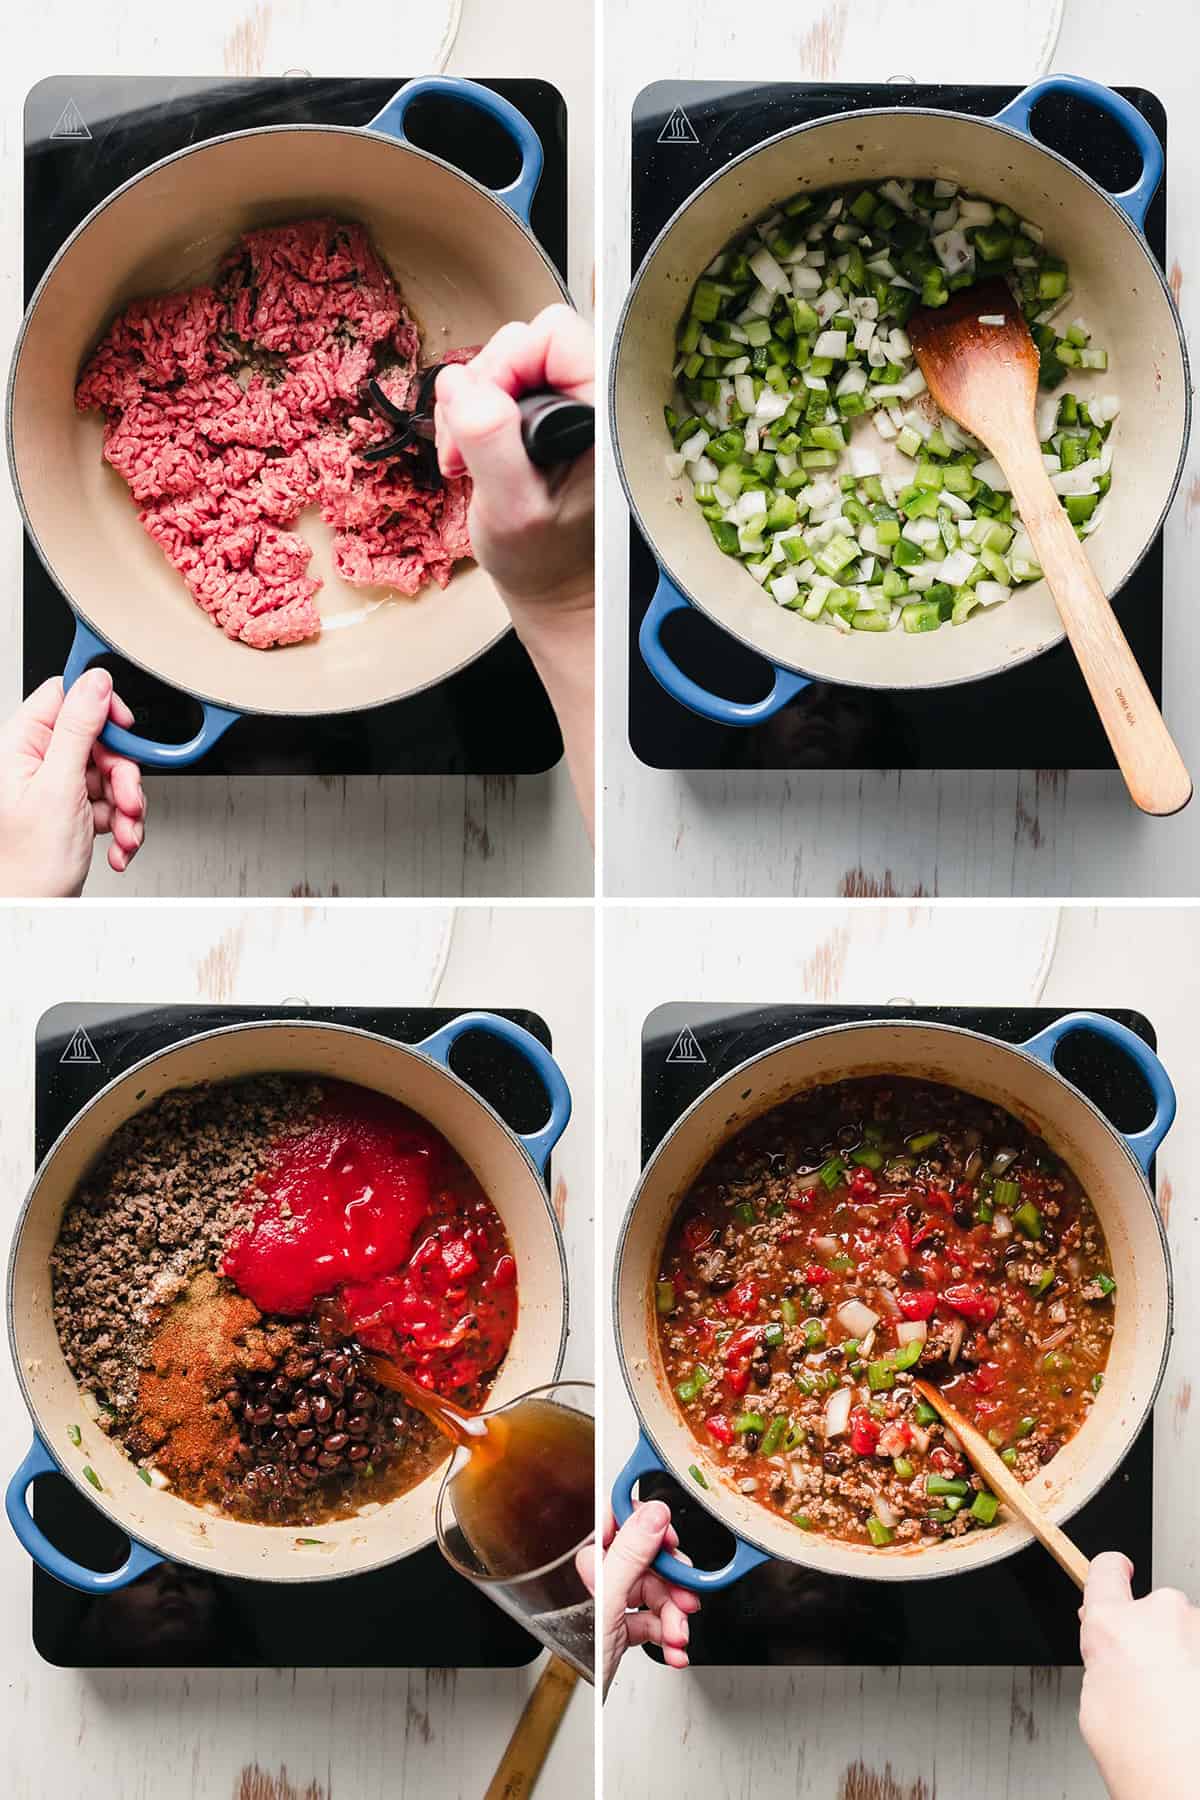 Image collage showing the steps to make chili, sautéing the meat and vegetables in a pan, adding tomatoes and beans, stirring the chili.